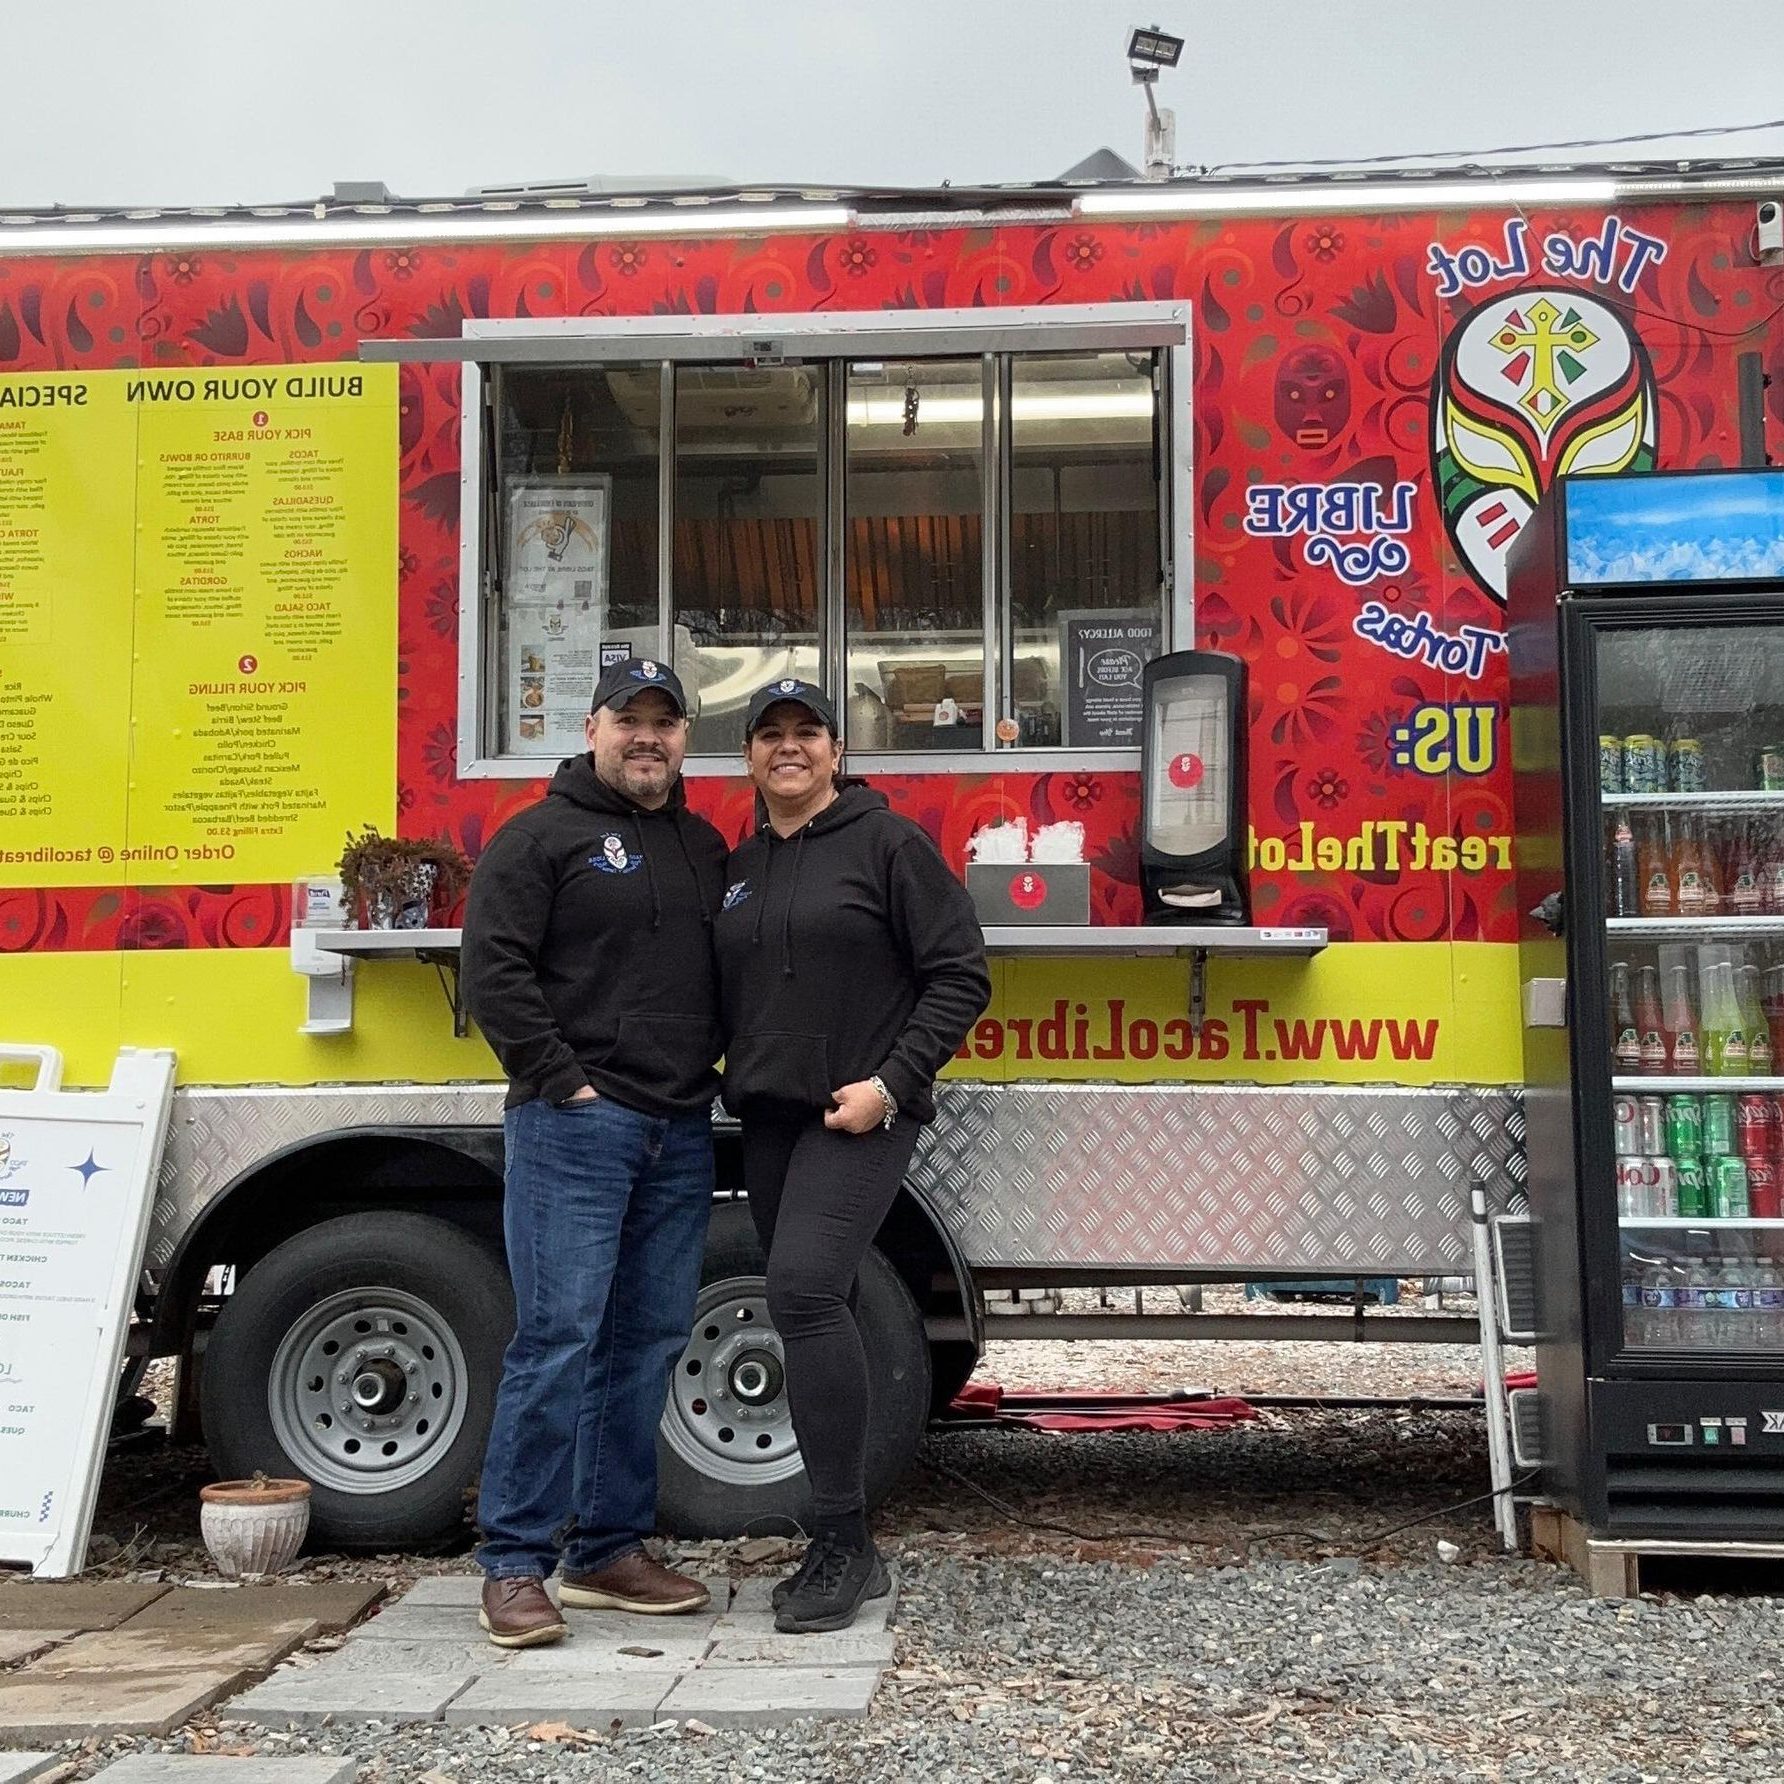 Mayra and Jaime the owners of Taco Libre standing in front of their food truck.